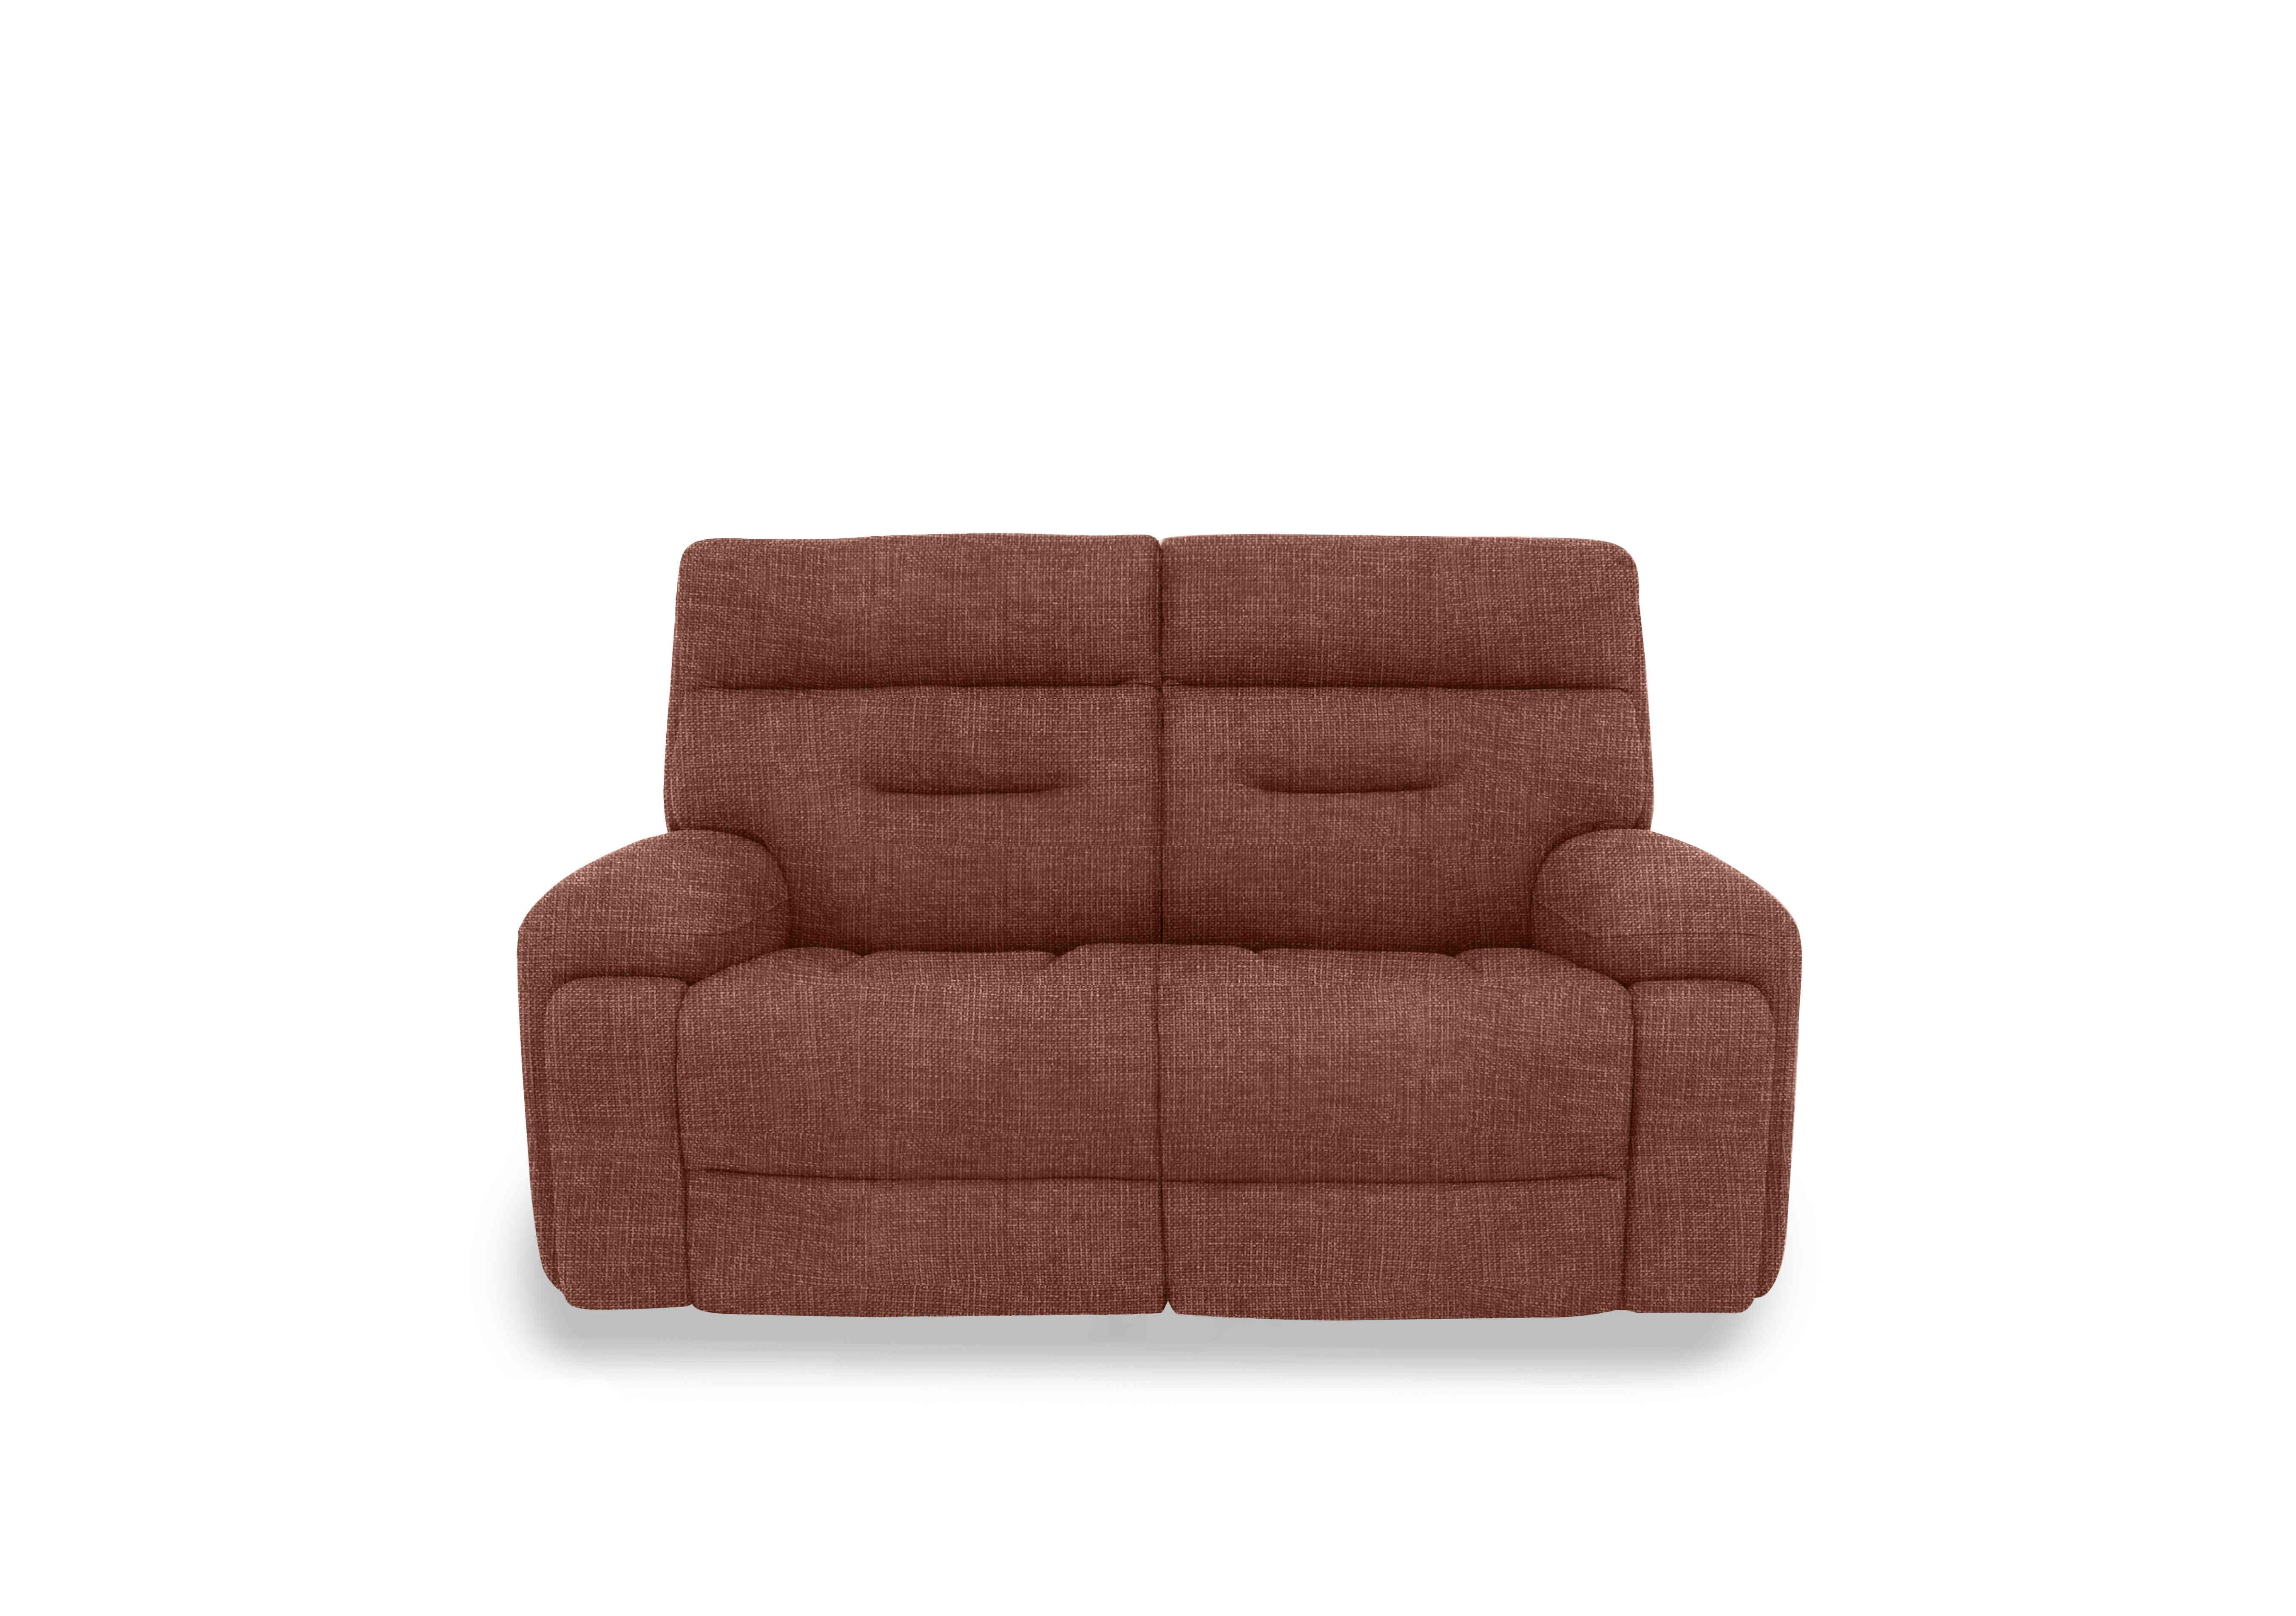 Cinemax 2 Seater Fabric Sofa in Hf-0105 Halifax Red Maple on Furniture Village